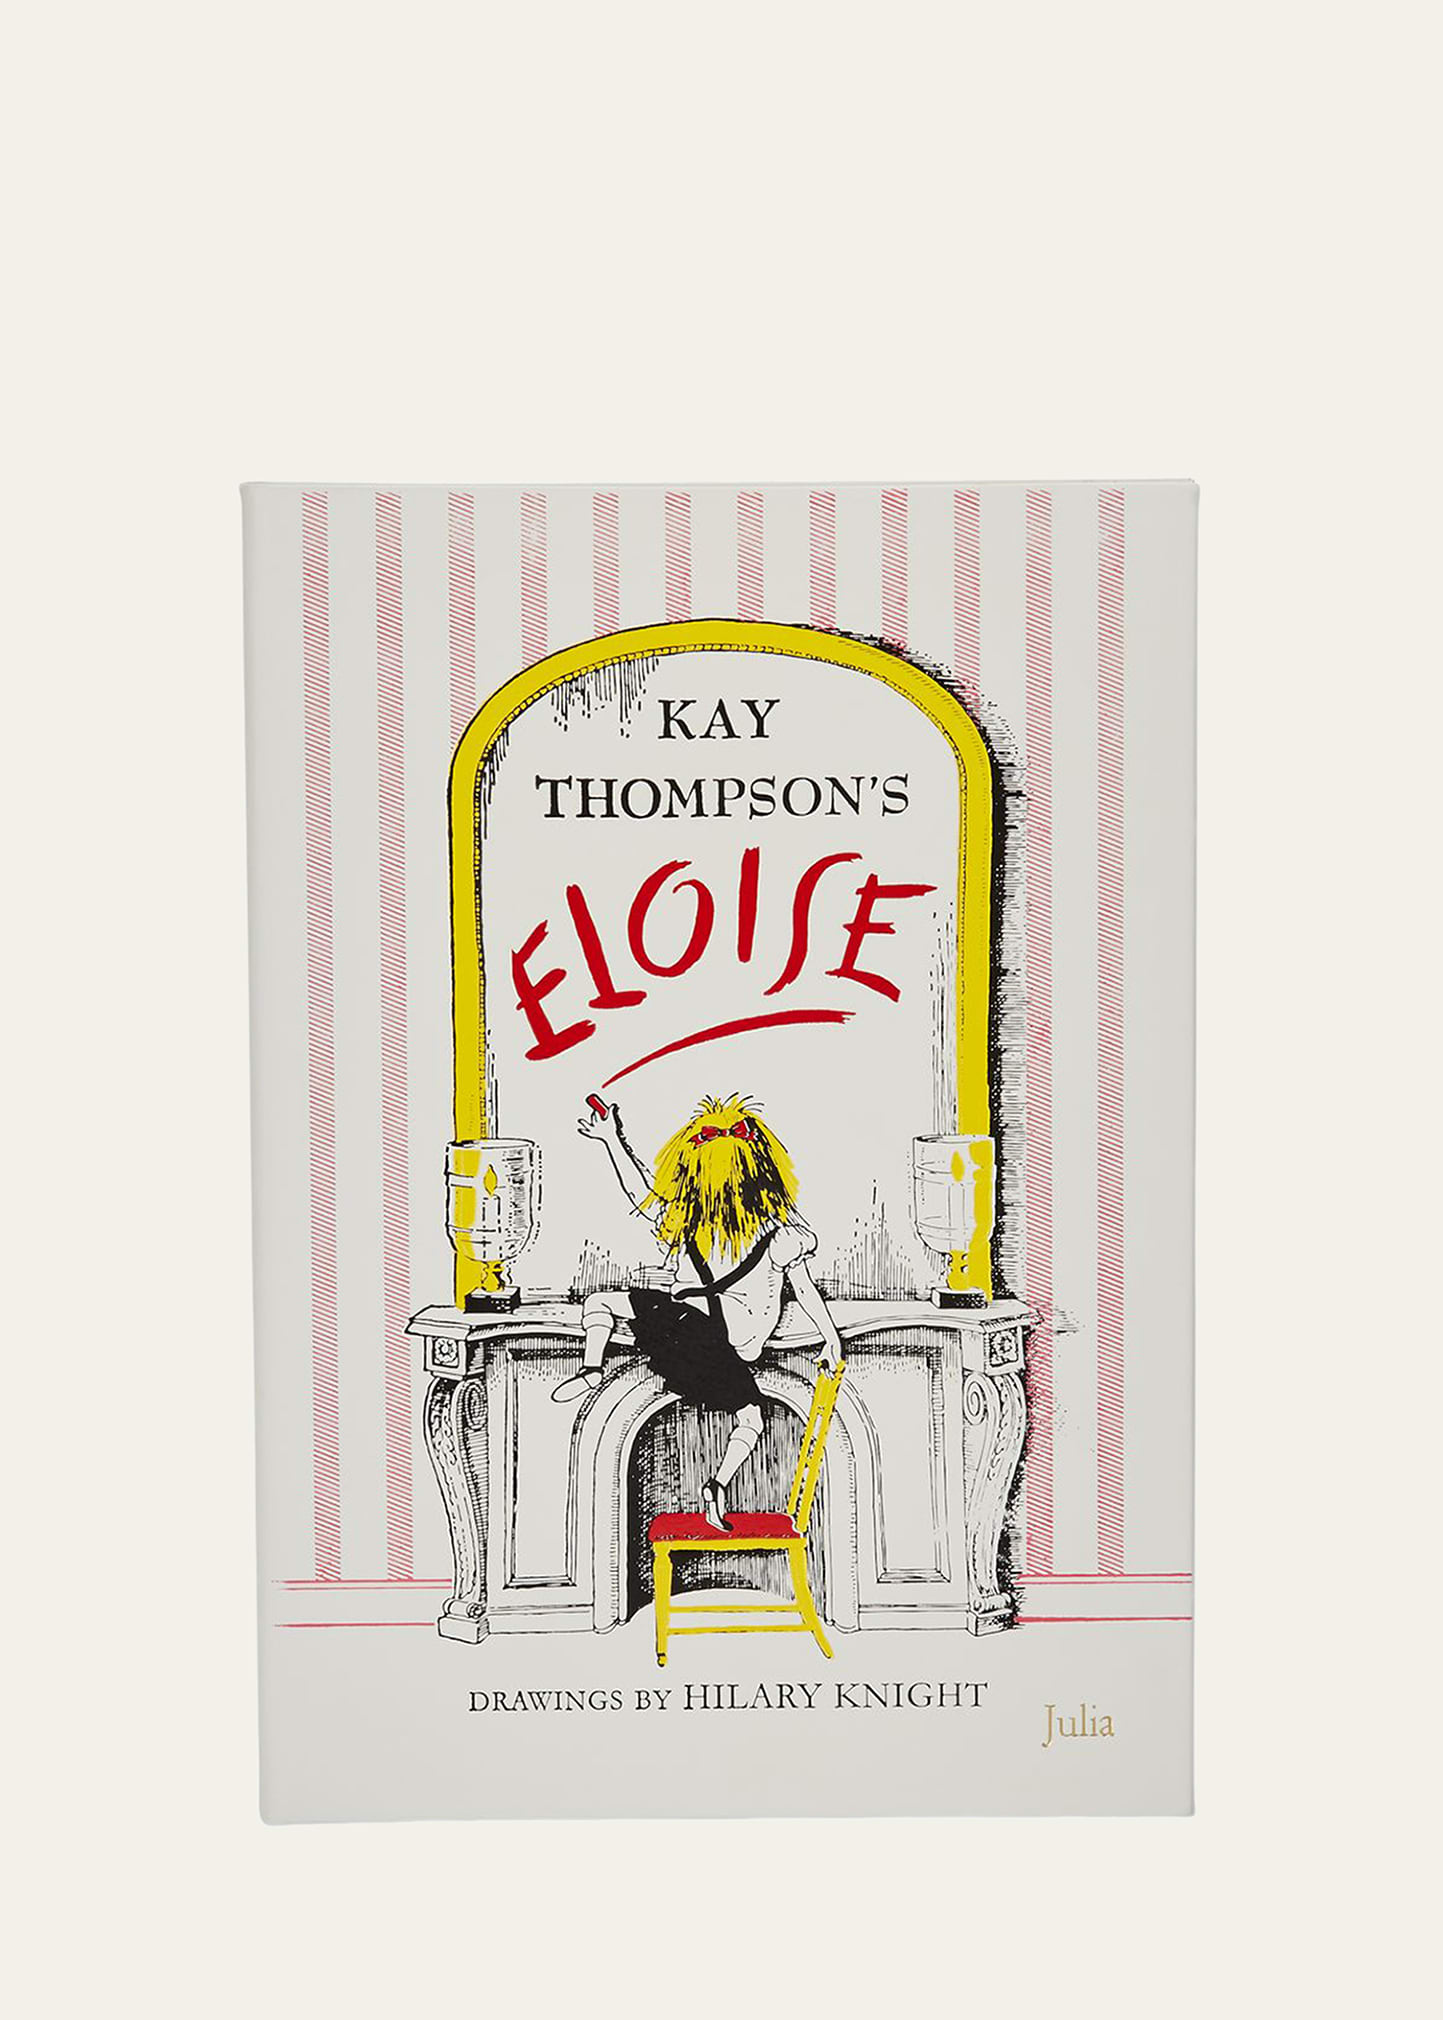 Eloise Children's Book by Kay Thompson, Personalized